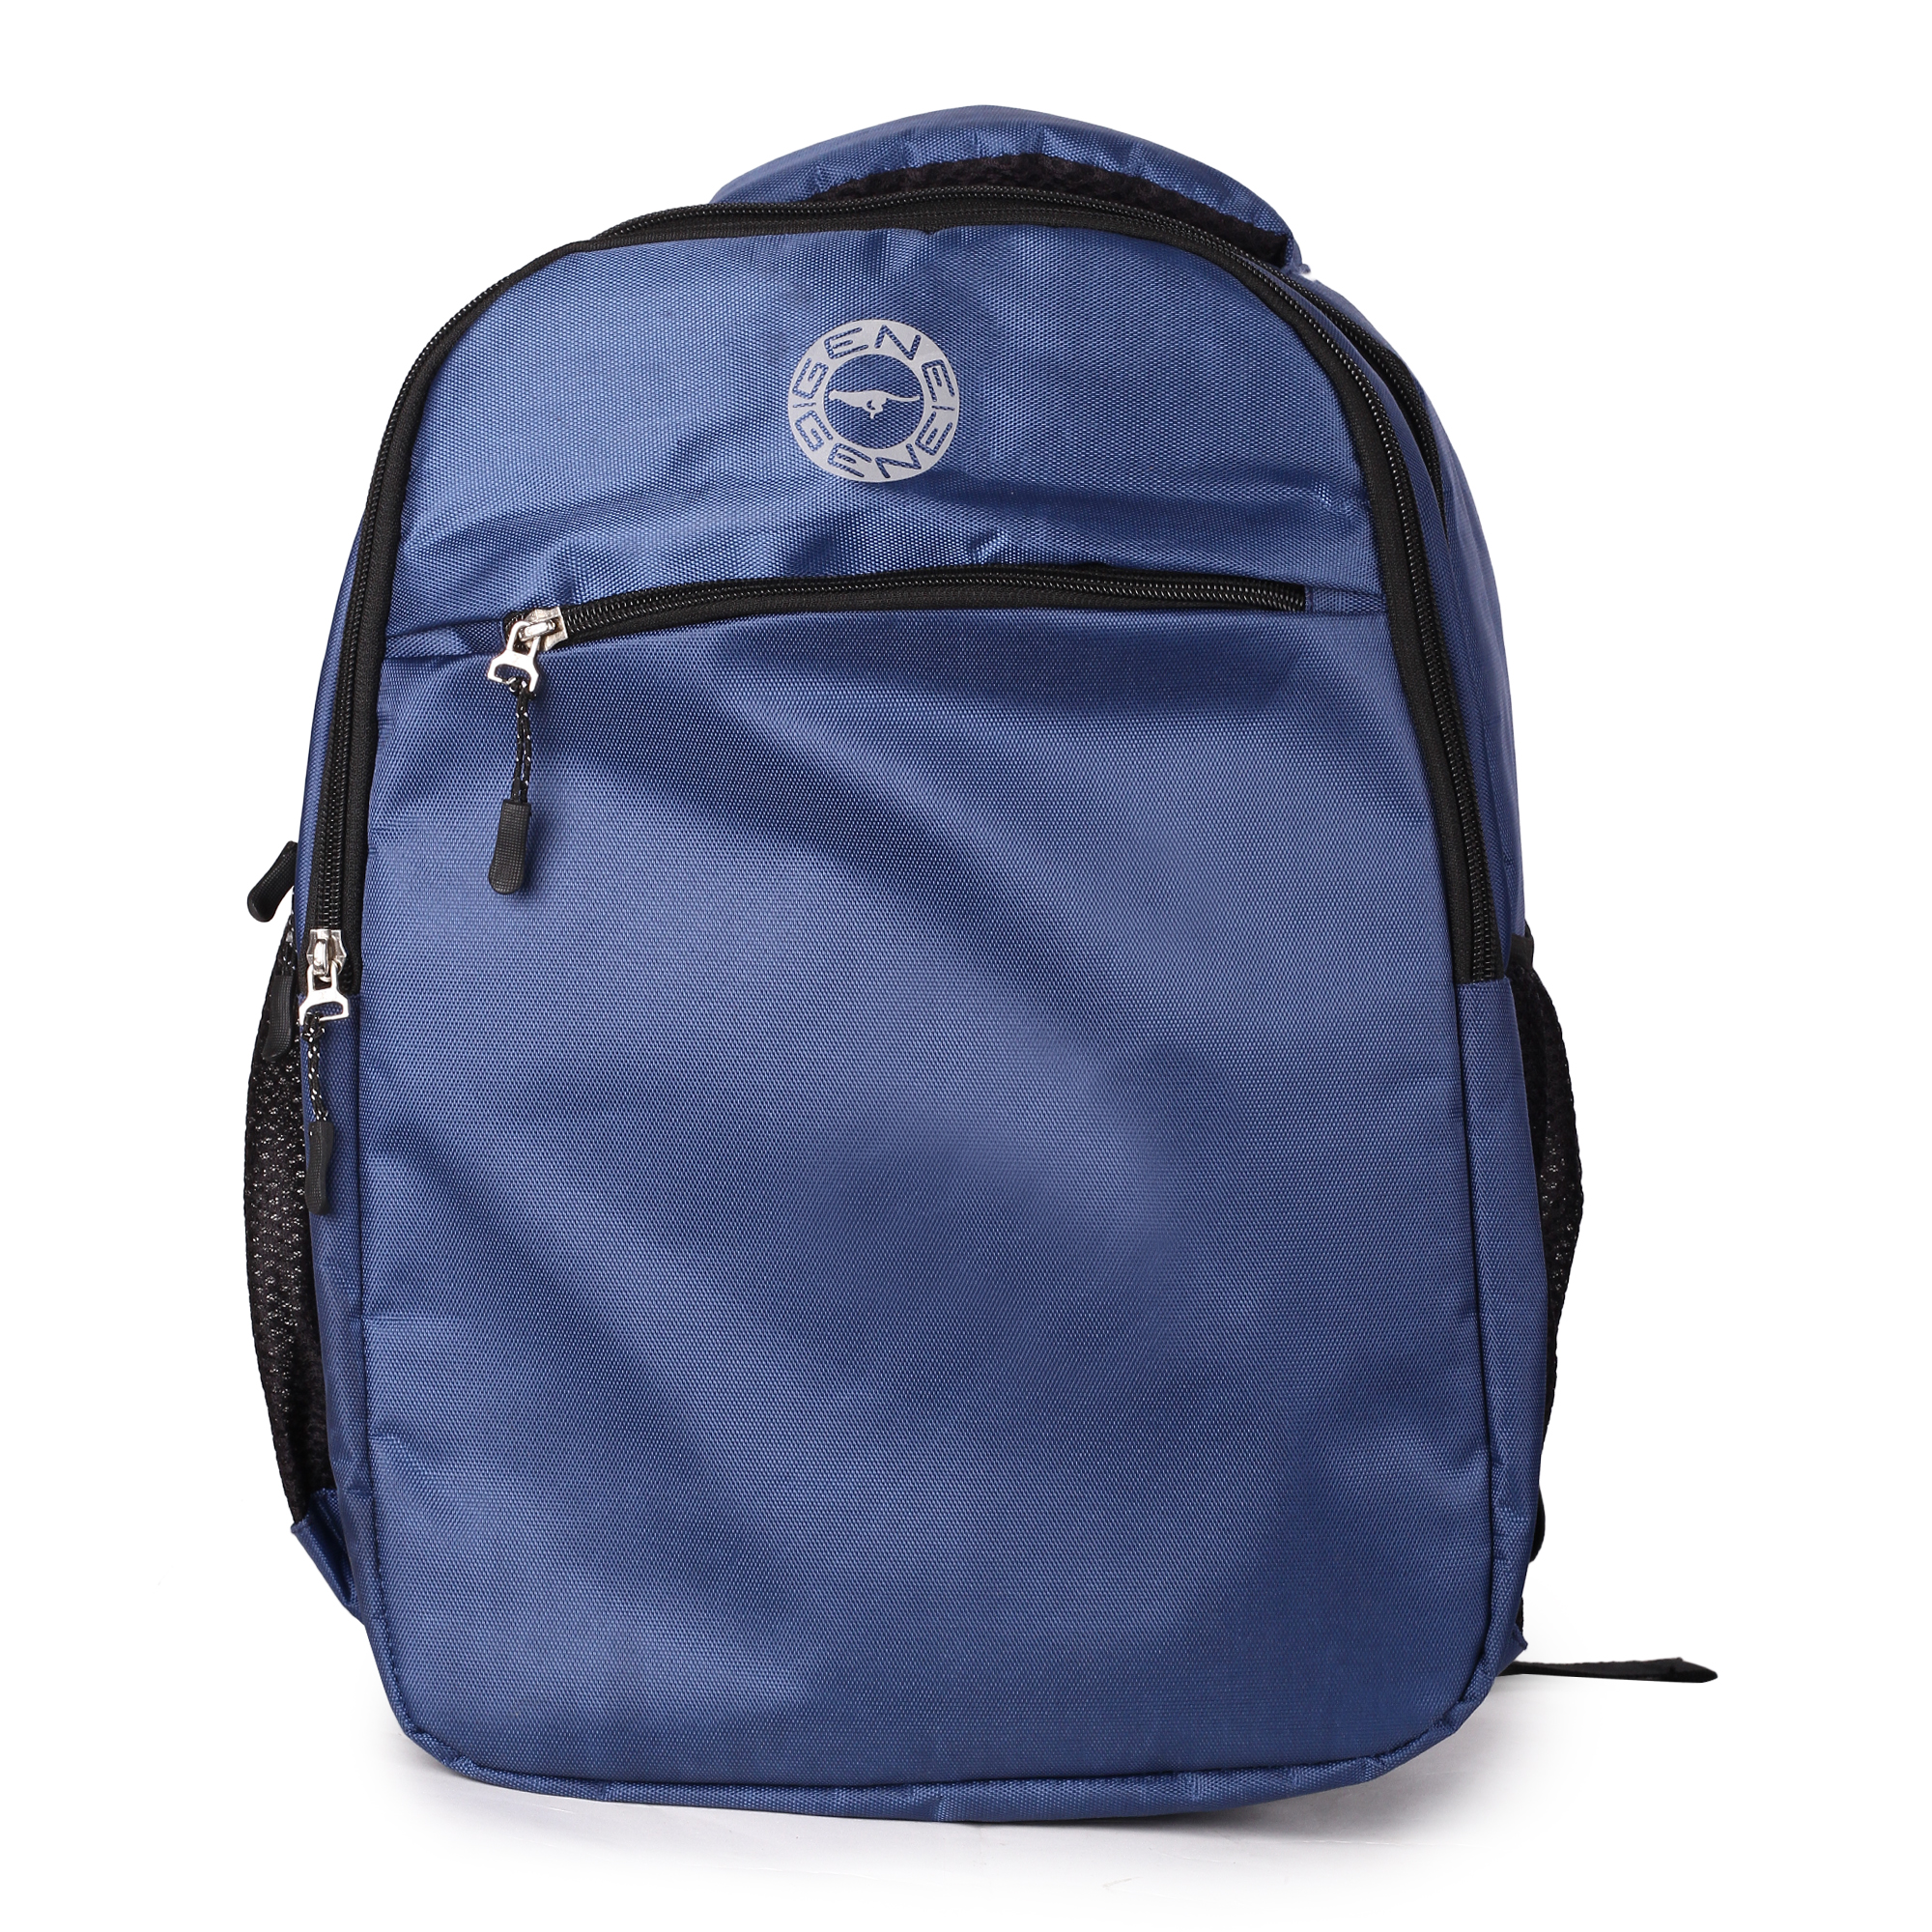 Multiple Pocket Bags for Students online at StarAndDaisy